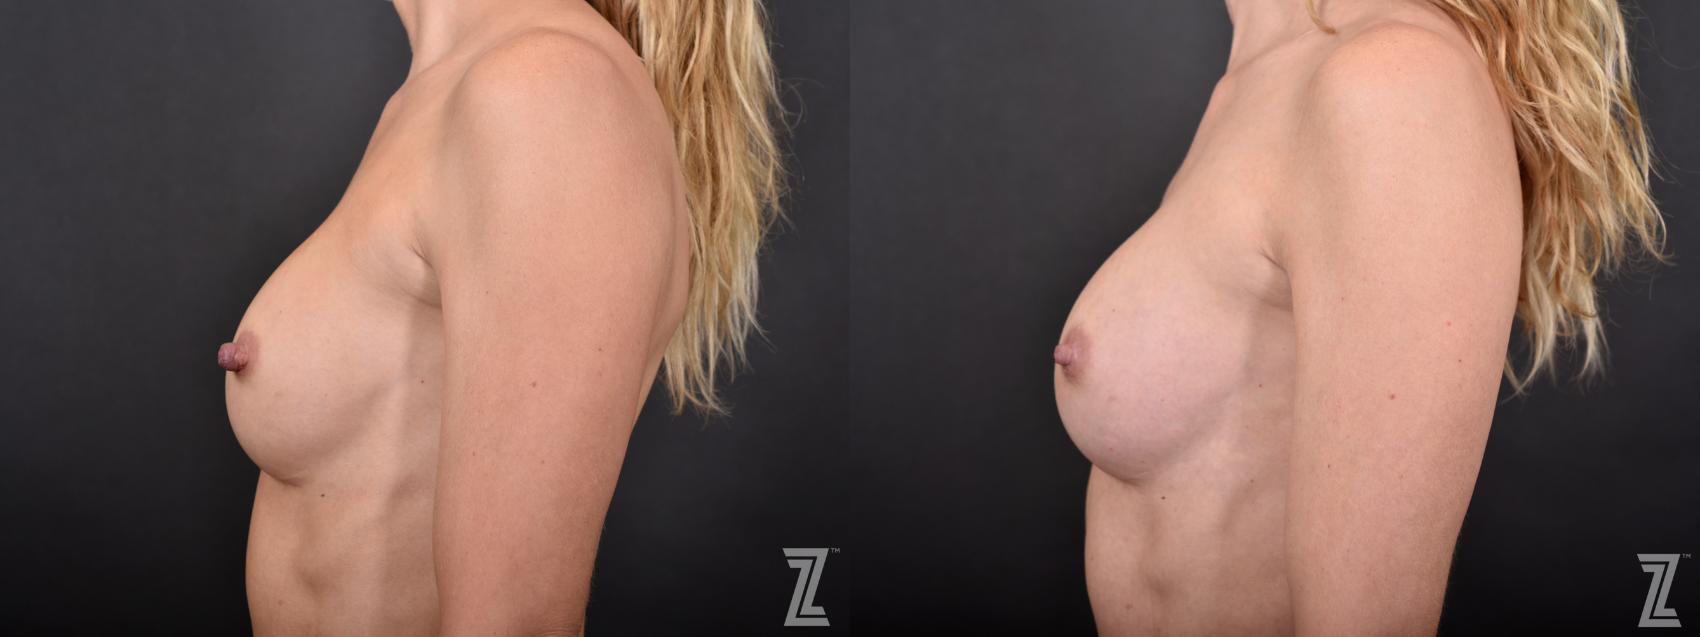 Nipple Reduction Before & After Photo | Austin, TX | The Piazza Center for Plastic Surgery & Advanced Skin Care